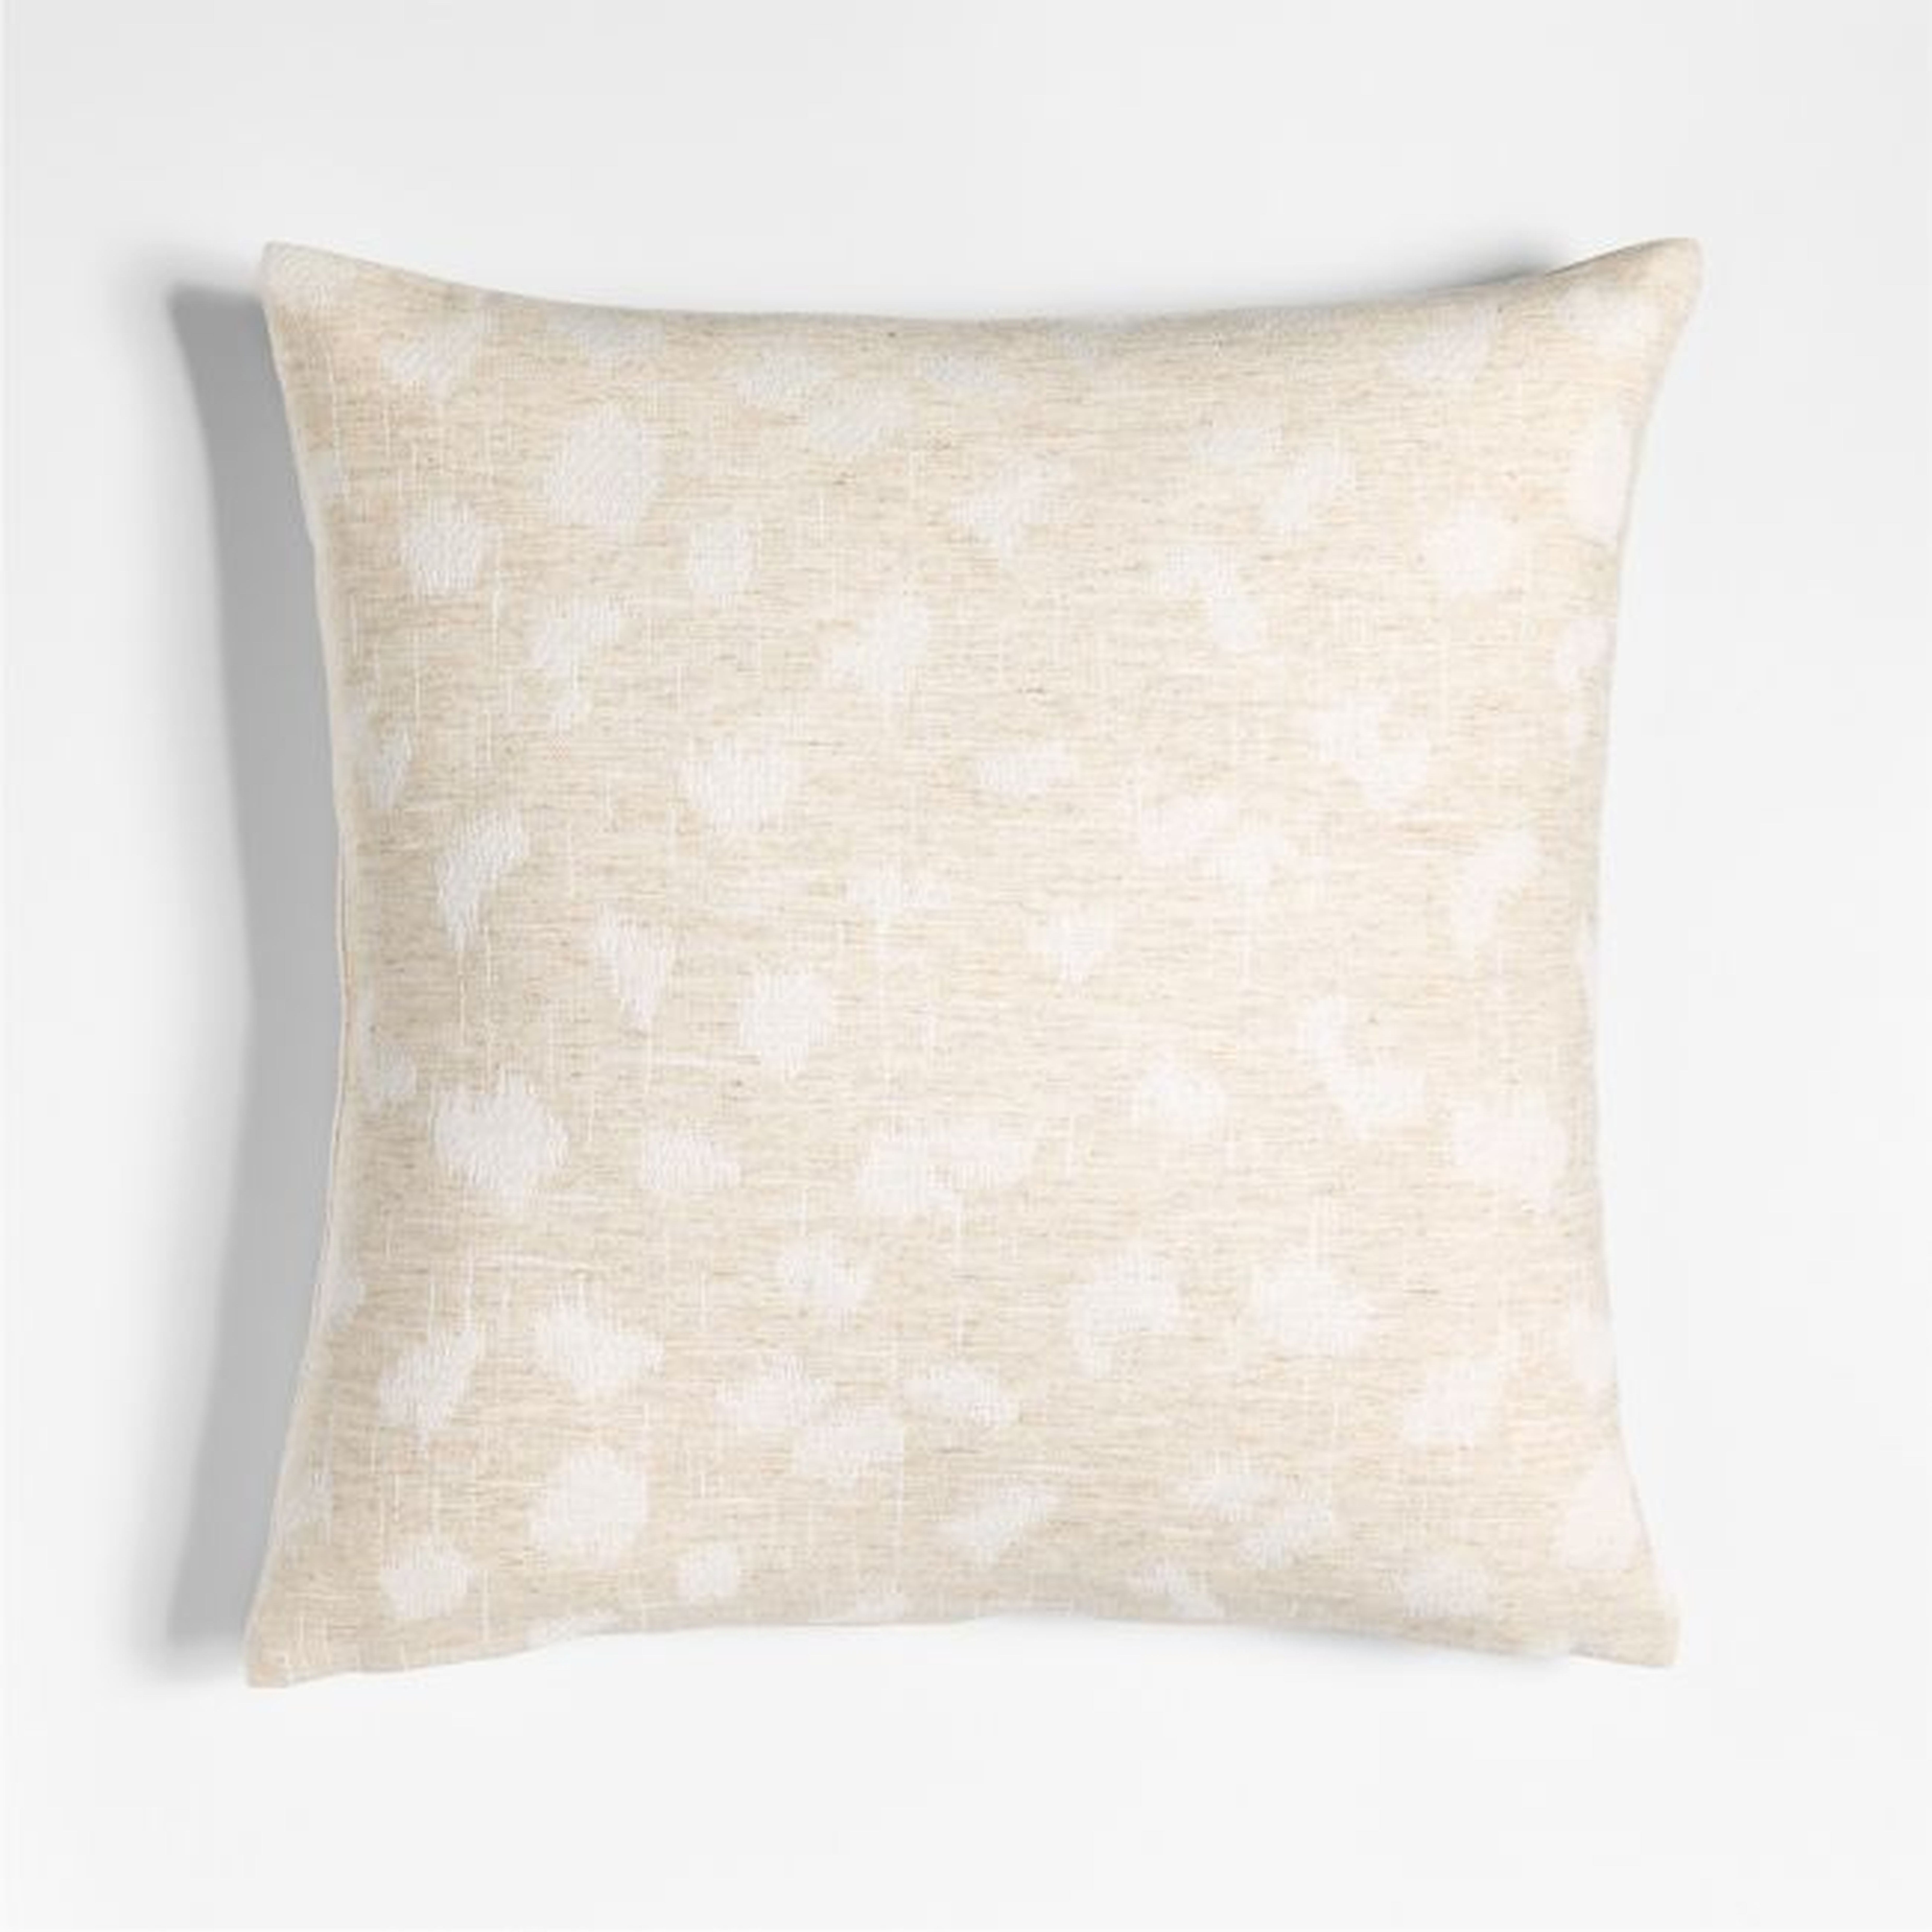 Jacquard 20" Ivory Cheetah Print Pillow Cover - Crate and Barrel